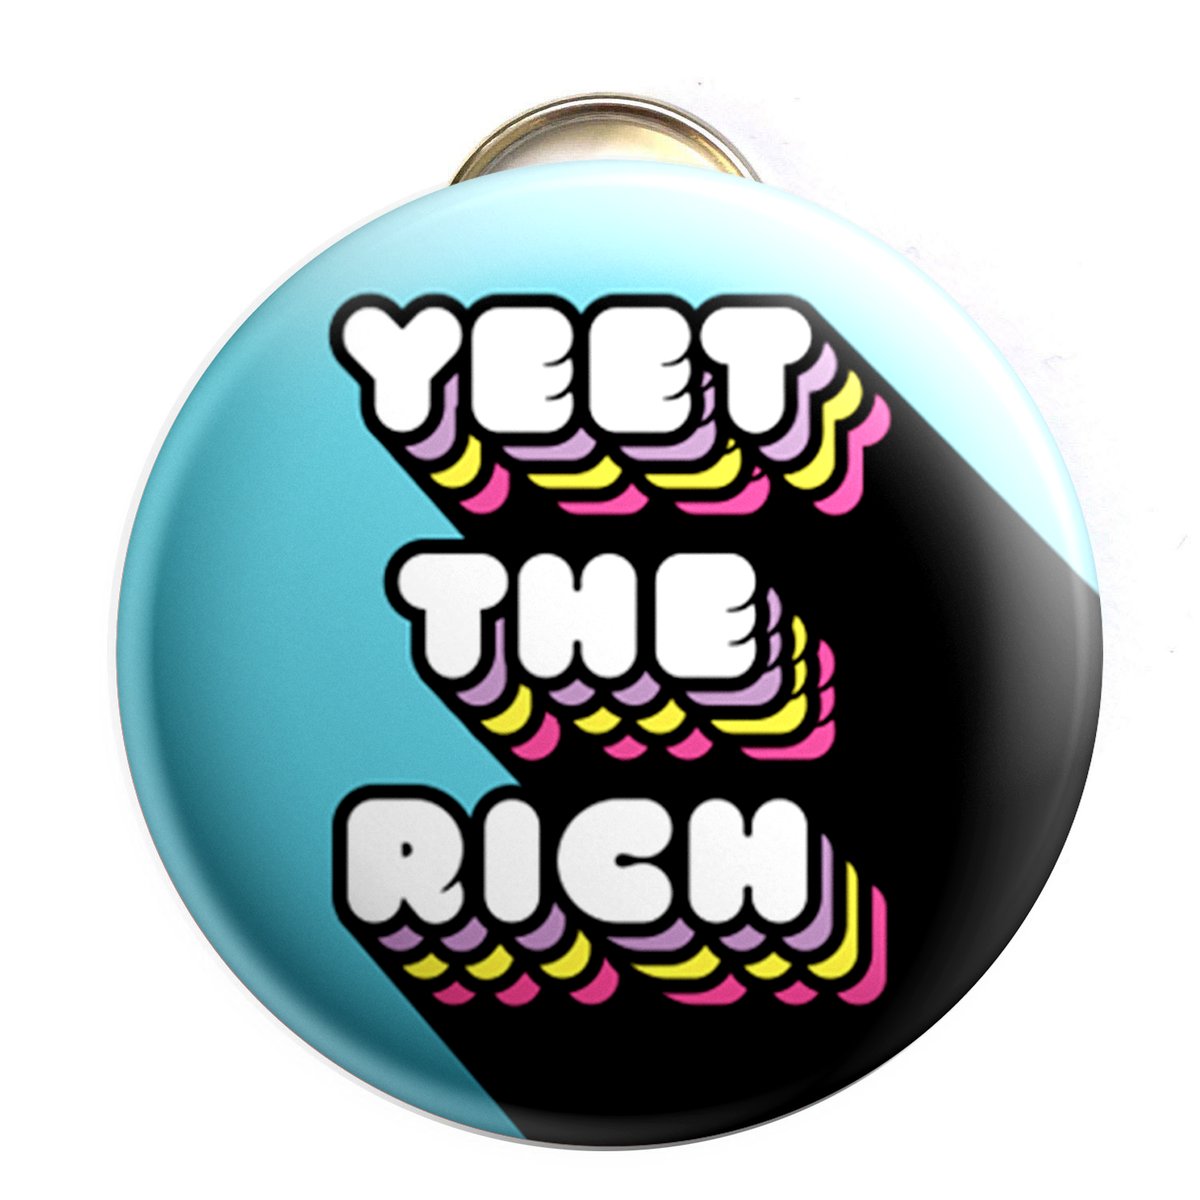 Image of Yeet the Rich Bottle Opener/ Button/ Magnet